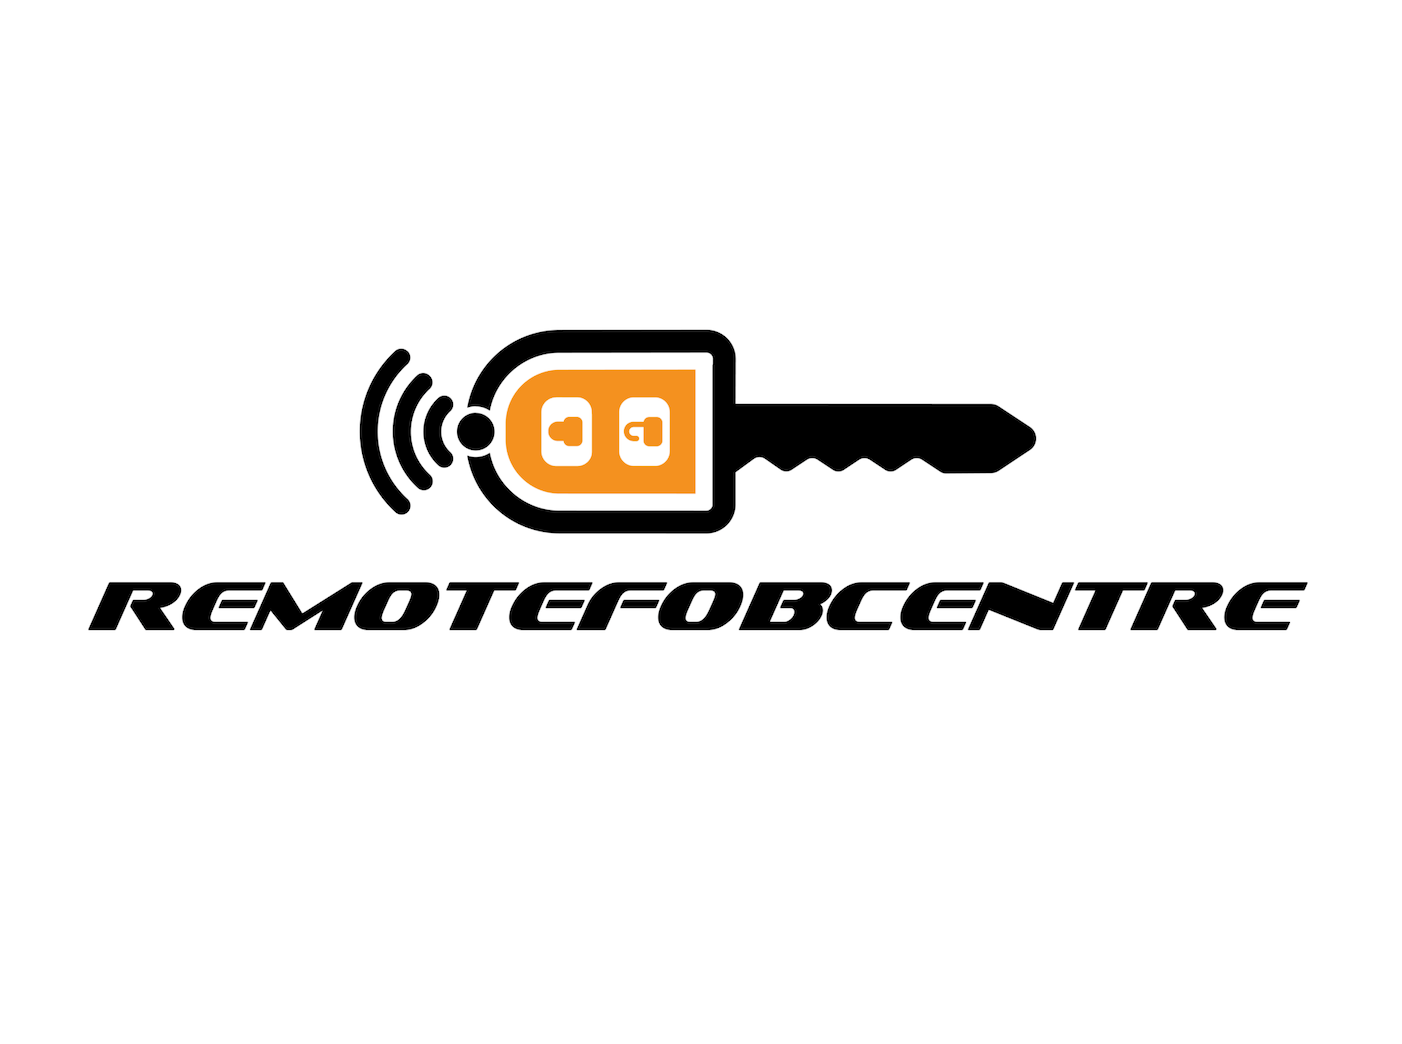 Why choose Remotefobcentre for your car key issues?